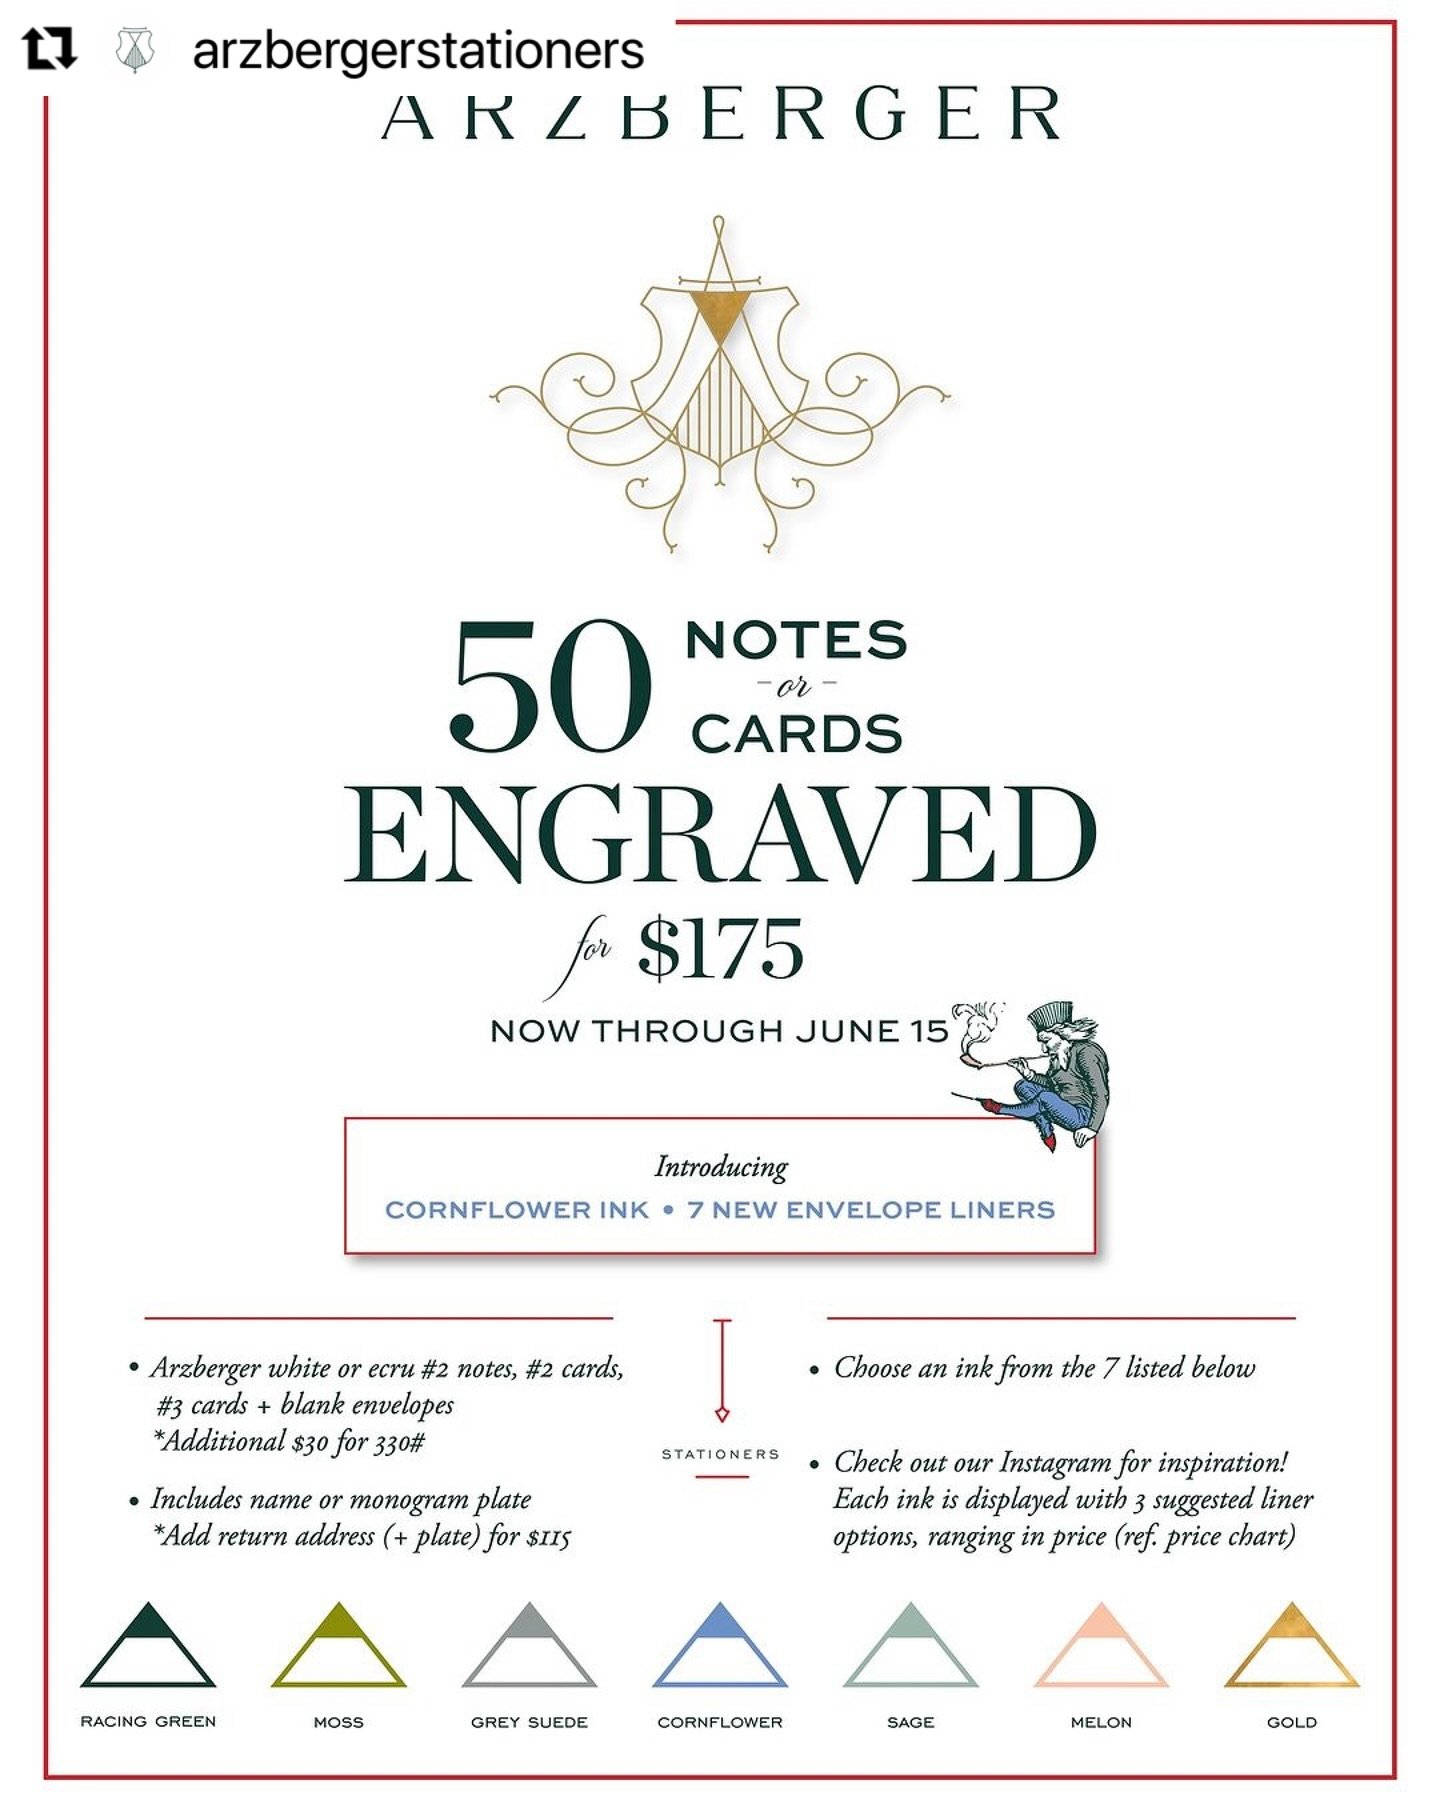 Arzberger engraving sale! 🔔 Now through June 15th, get 50 engraved notes or cards for $175! 

See graphic for the fine print. Happy Friday! 

#arzberger #arzbergerstationers #stationery #customstationery #paper #charlottenc #charlottesmallbusiness #